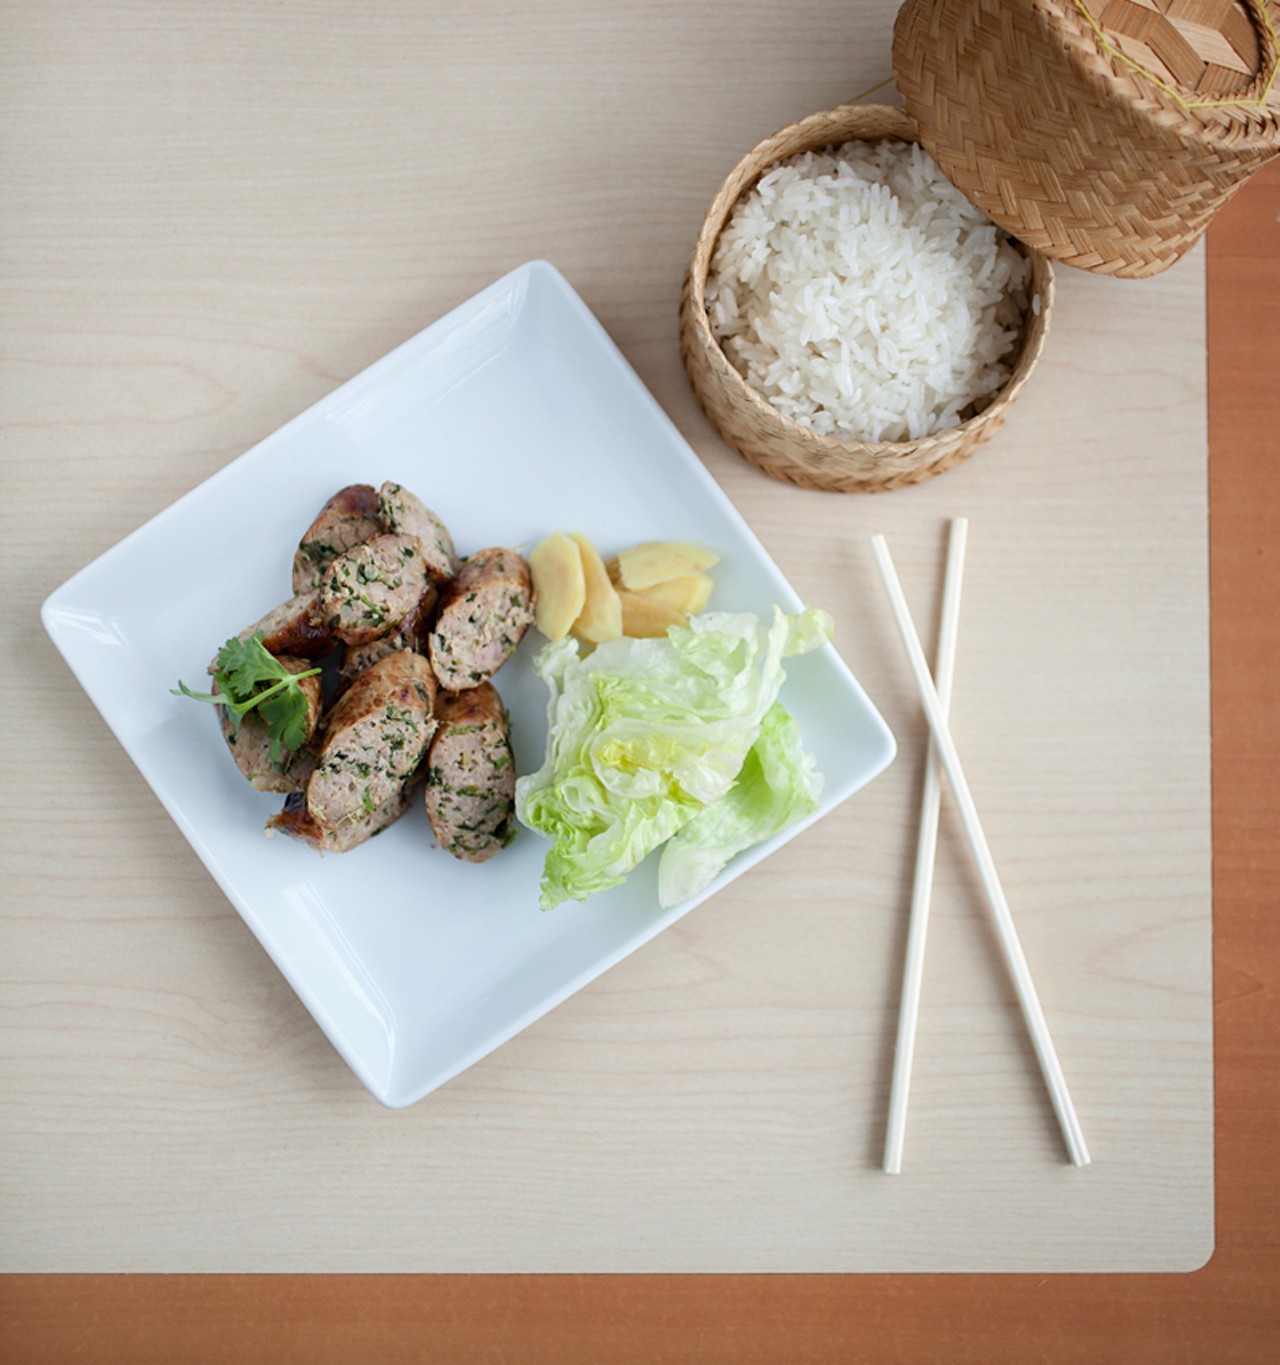 The Sai Oua, from the appetizer menu, is grilled Chiang Mai pork sausage with Thai herbs and is served with sticky rice.